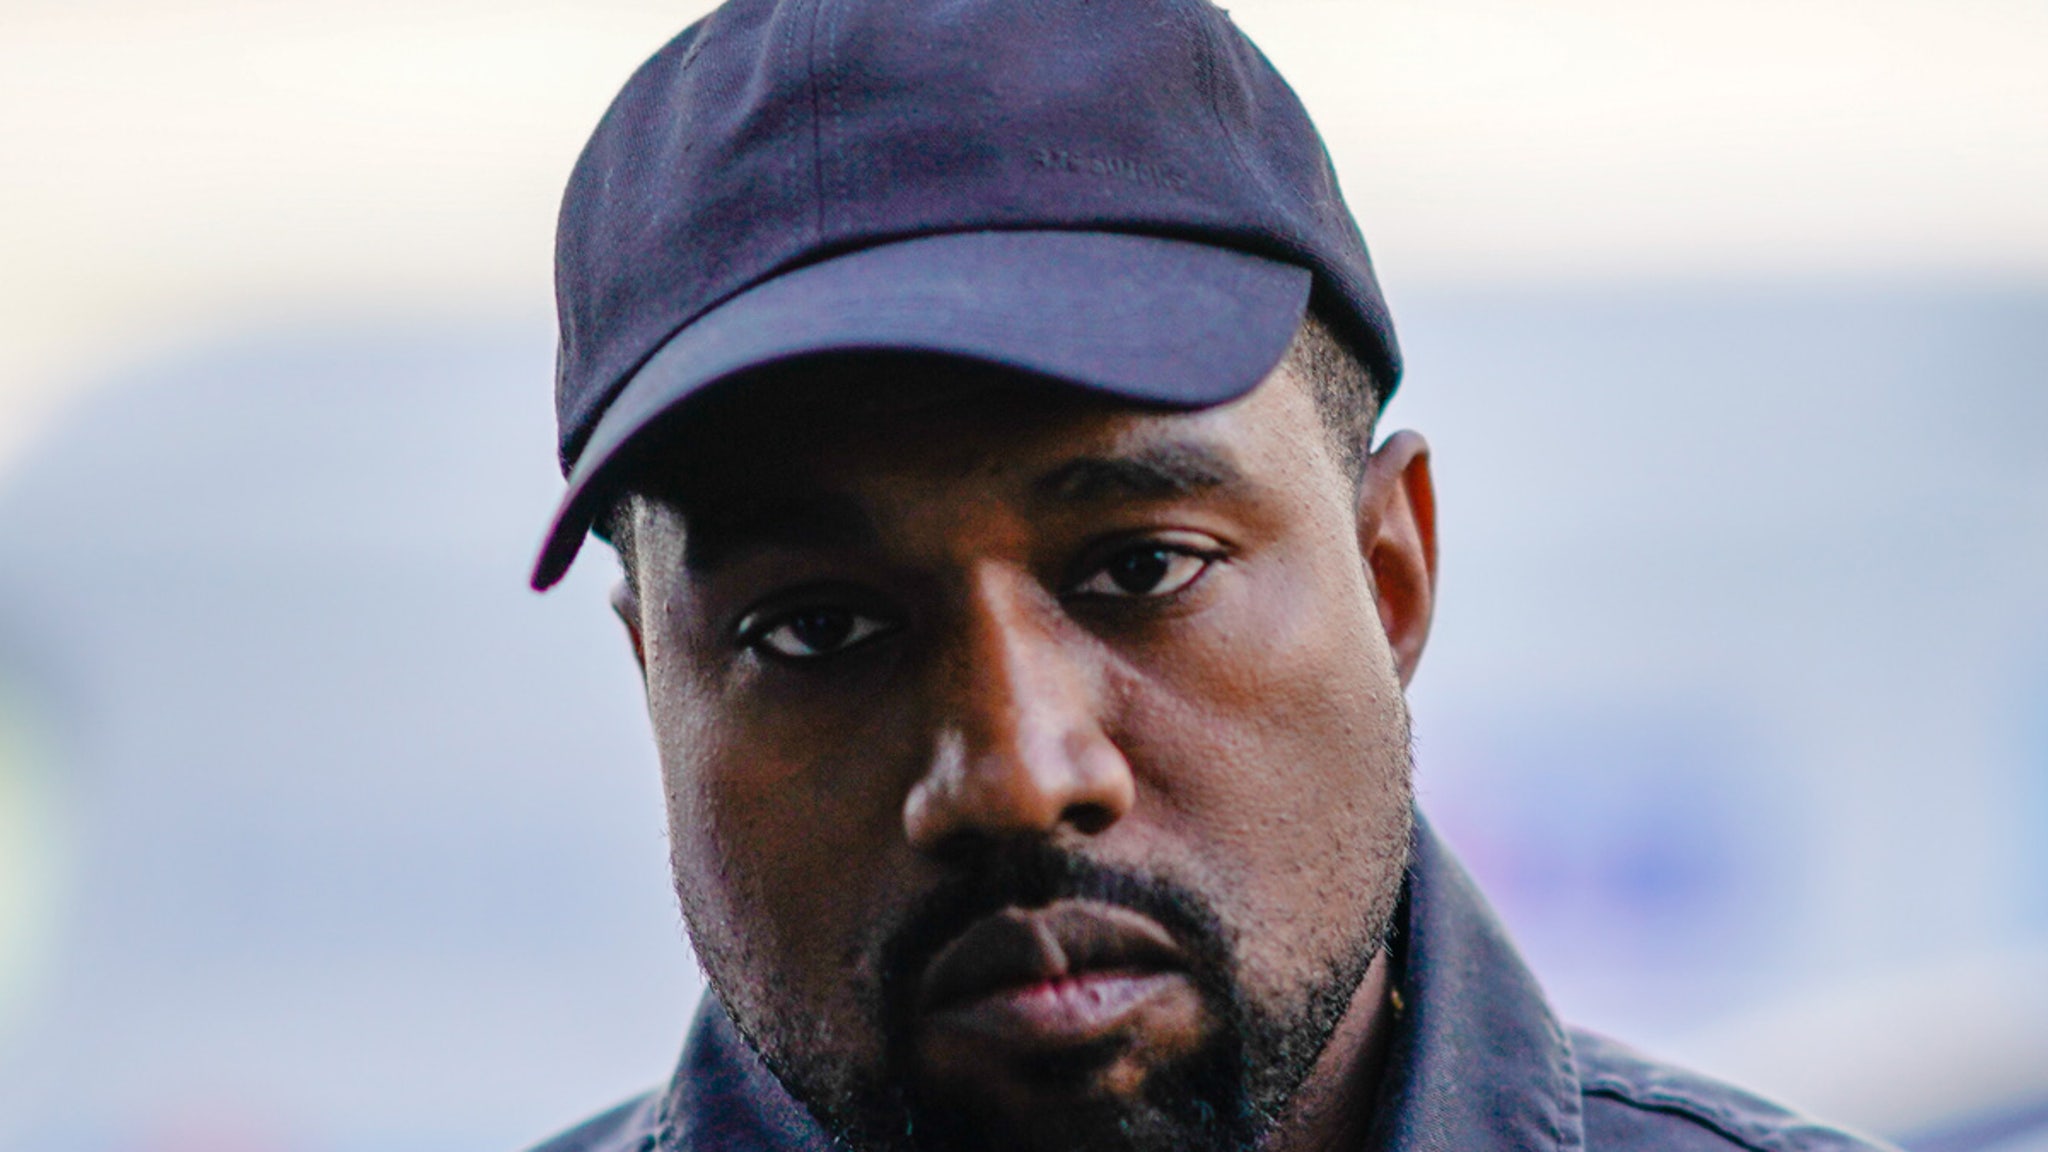 Kanye West Can't Perform in Australia Unless Fully Vaccinated from COVID